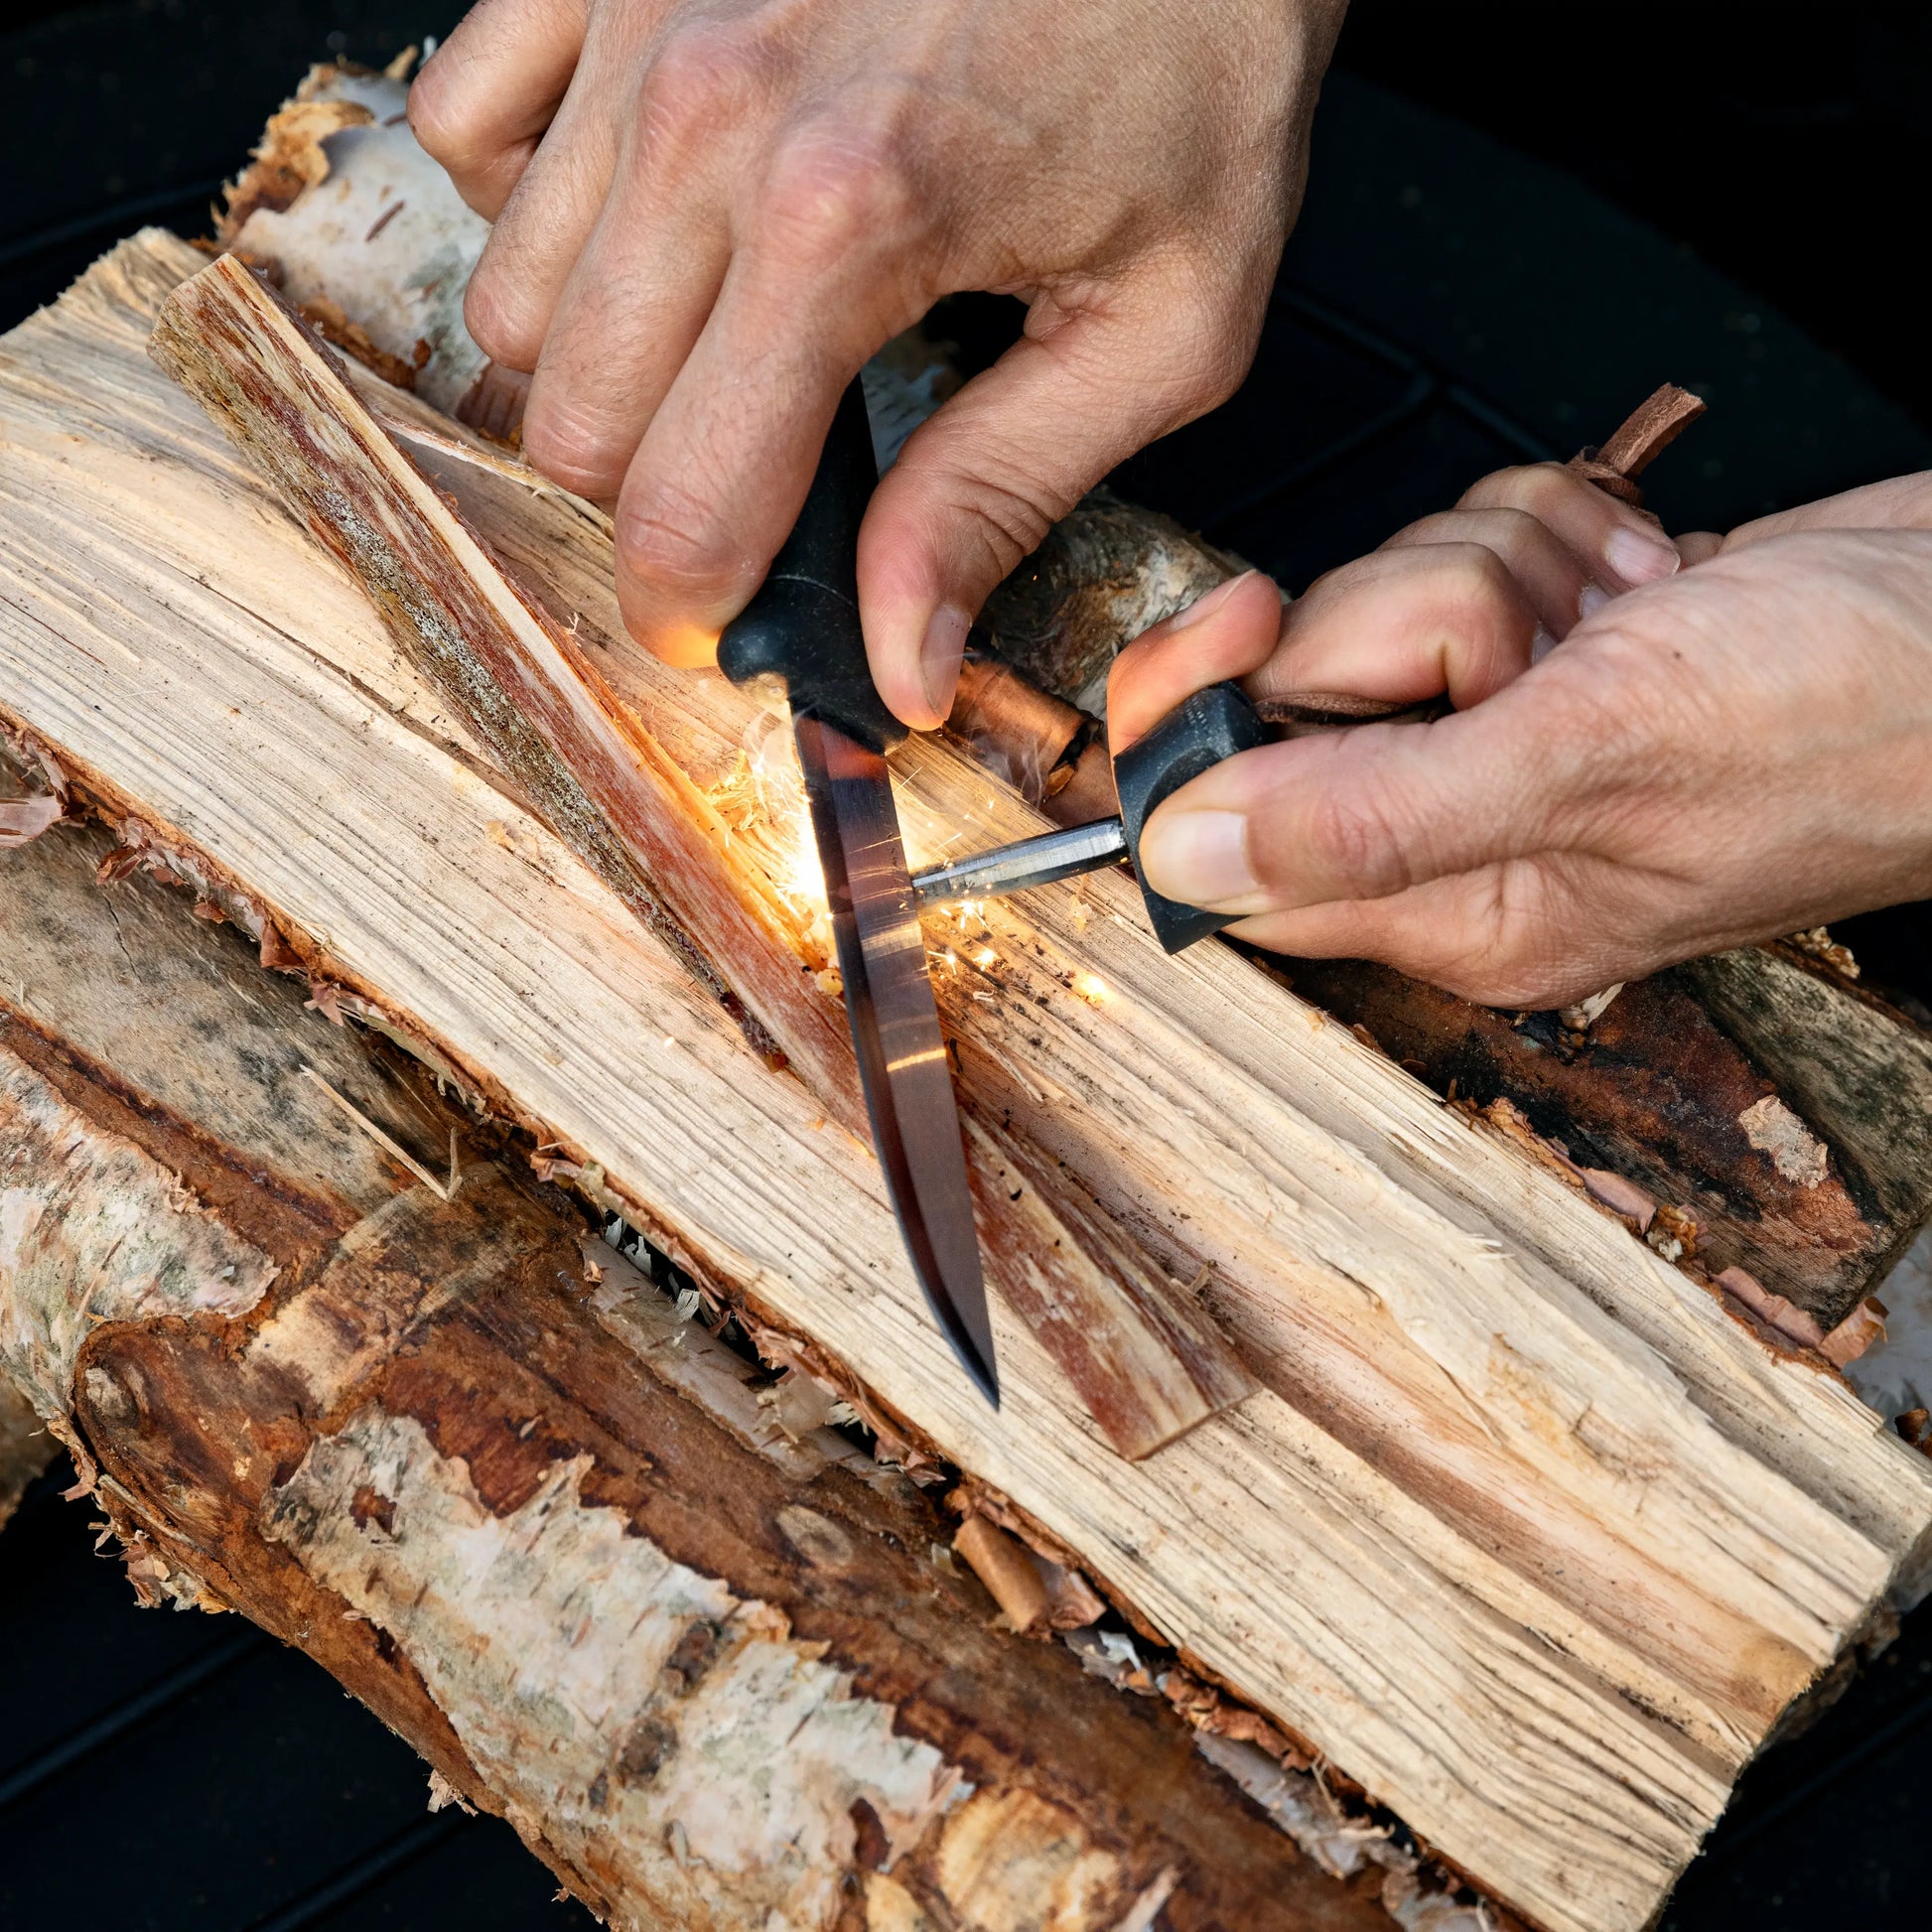 Making sparks with a knife and ferro rod on a wood log.